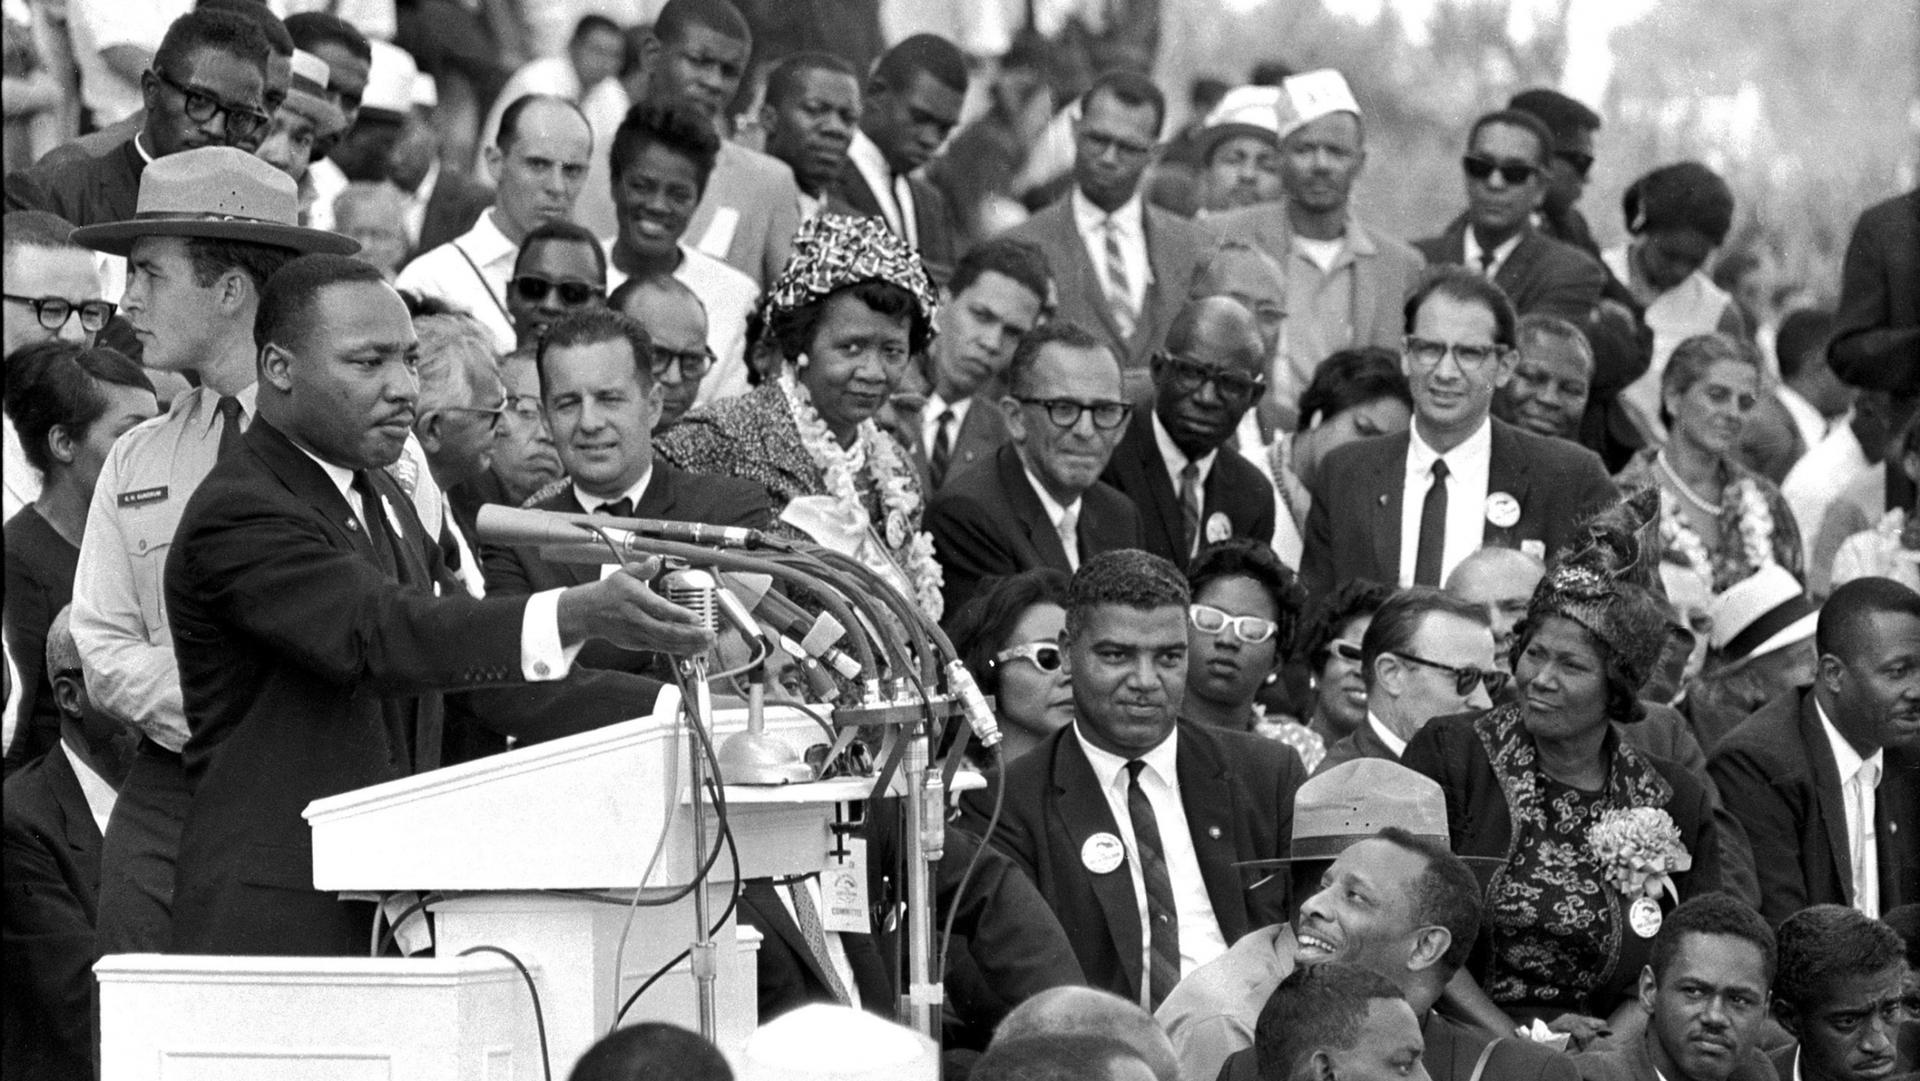 Rev. Dr. Martin Luther King Jr. is shown in a black and white photograph standing at a podium with several microphones and a crowd of people bedhind him.